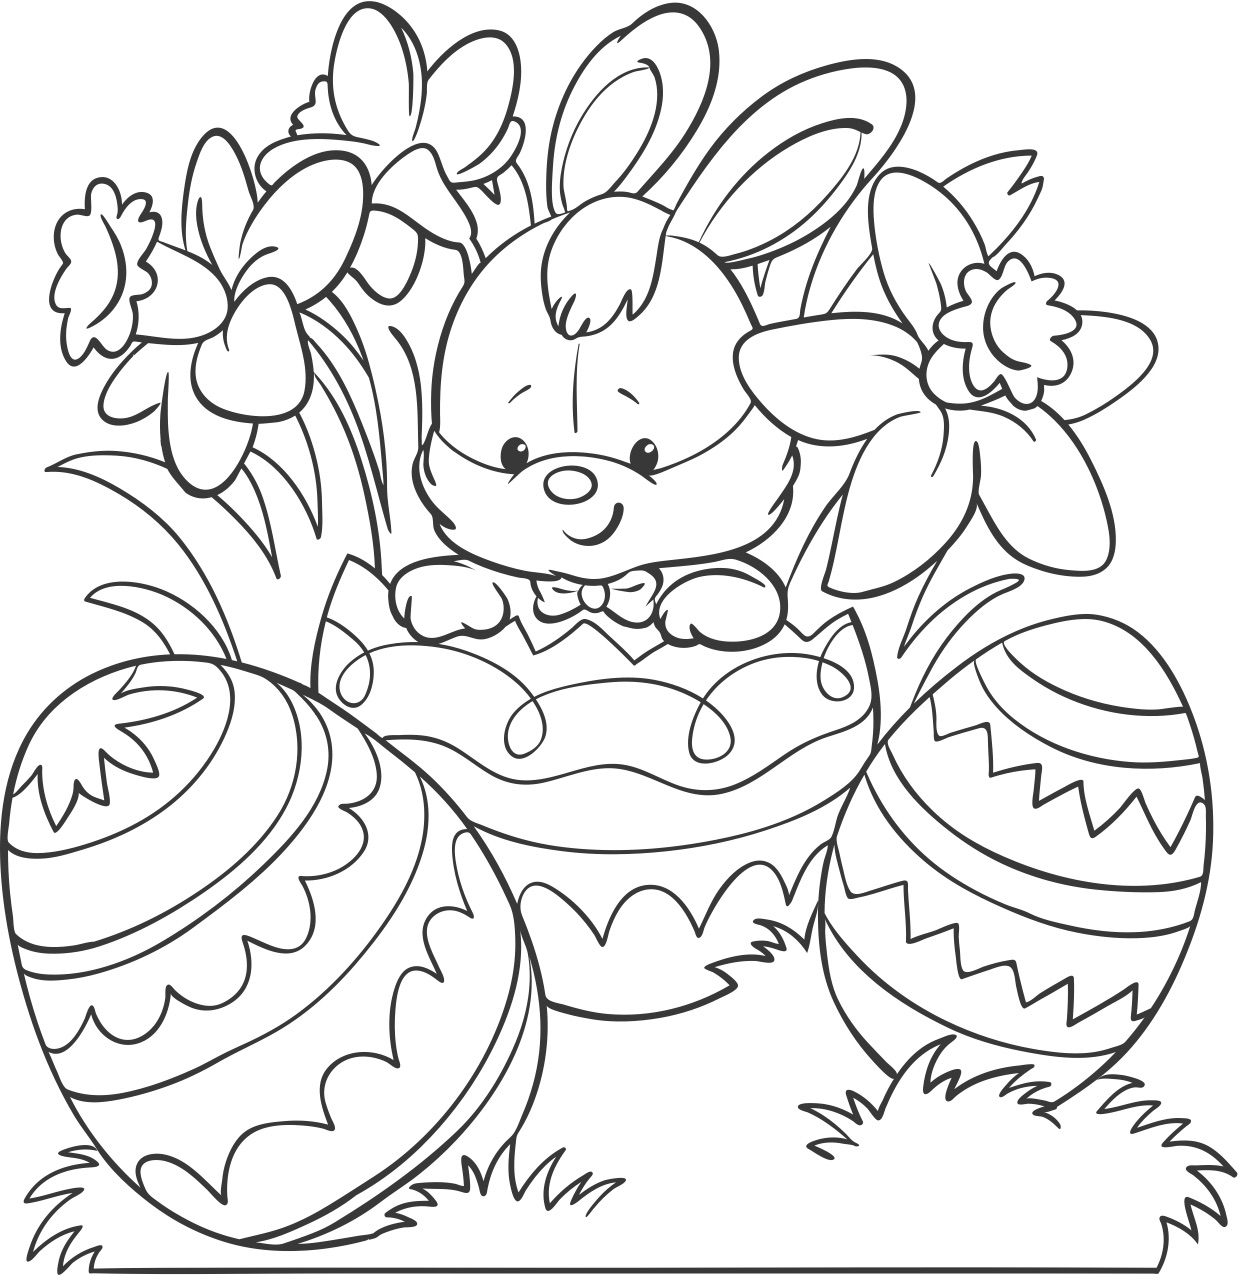 Download Easter Colouring Download - Print what matters